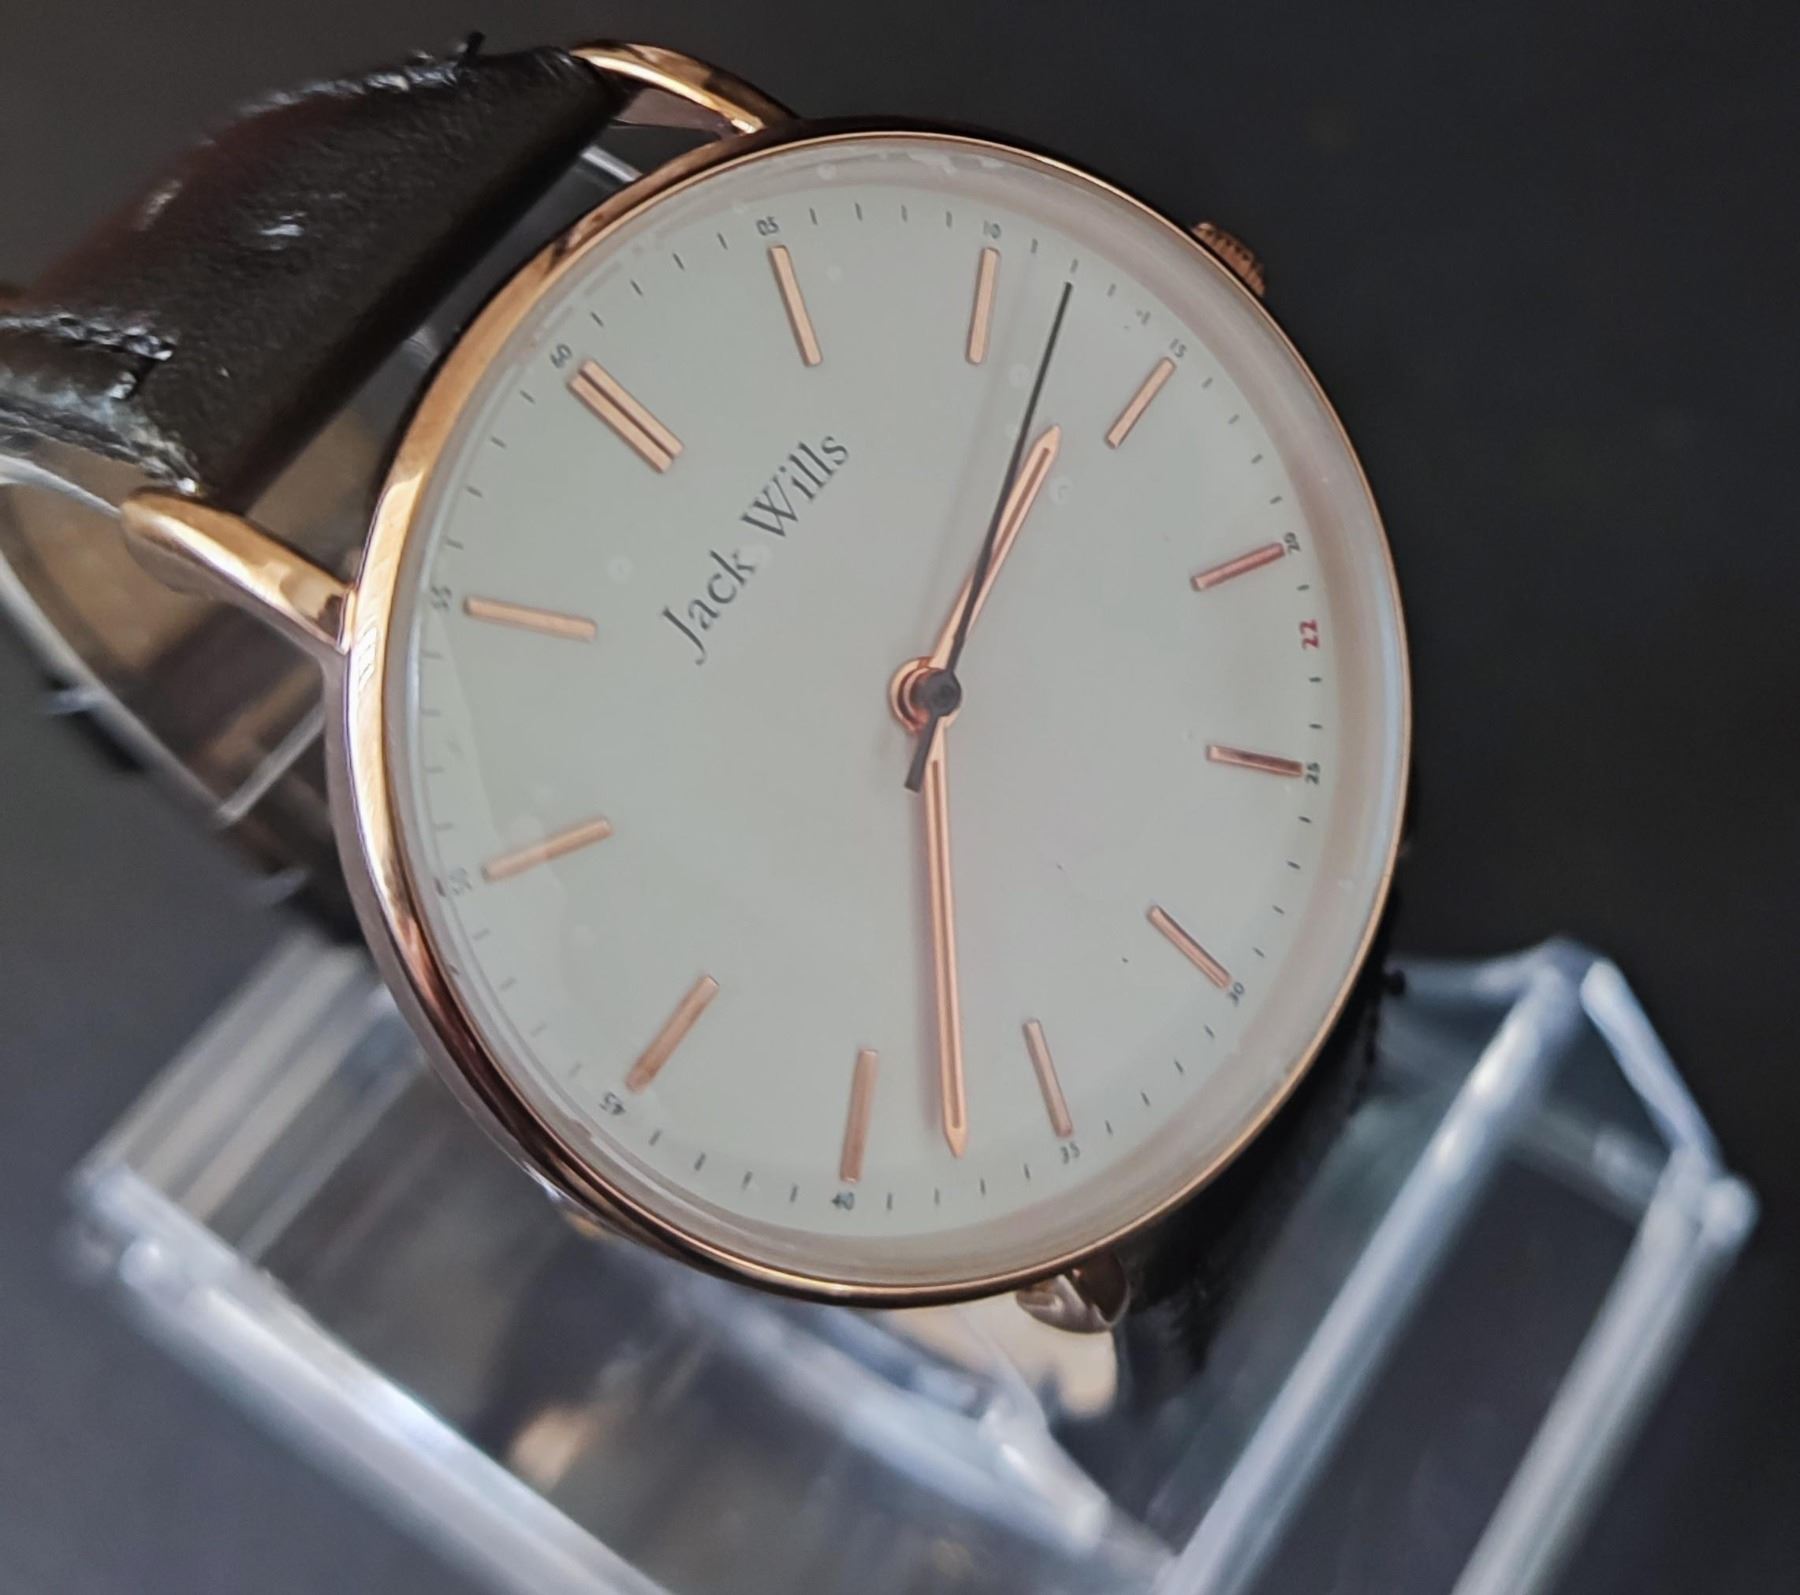 Brand new Jack Wills rose gold plated watch (JW018FLWH) With black Leather strap. Battery included. - Image 2 of 5